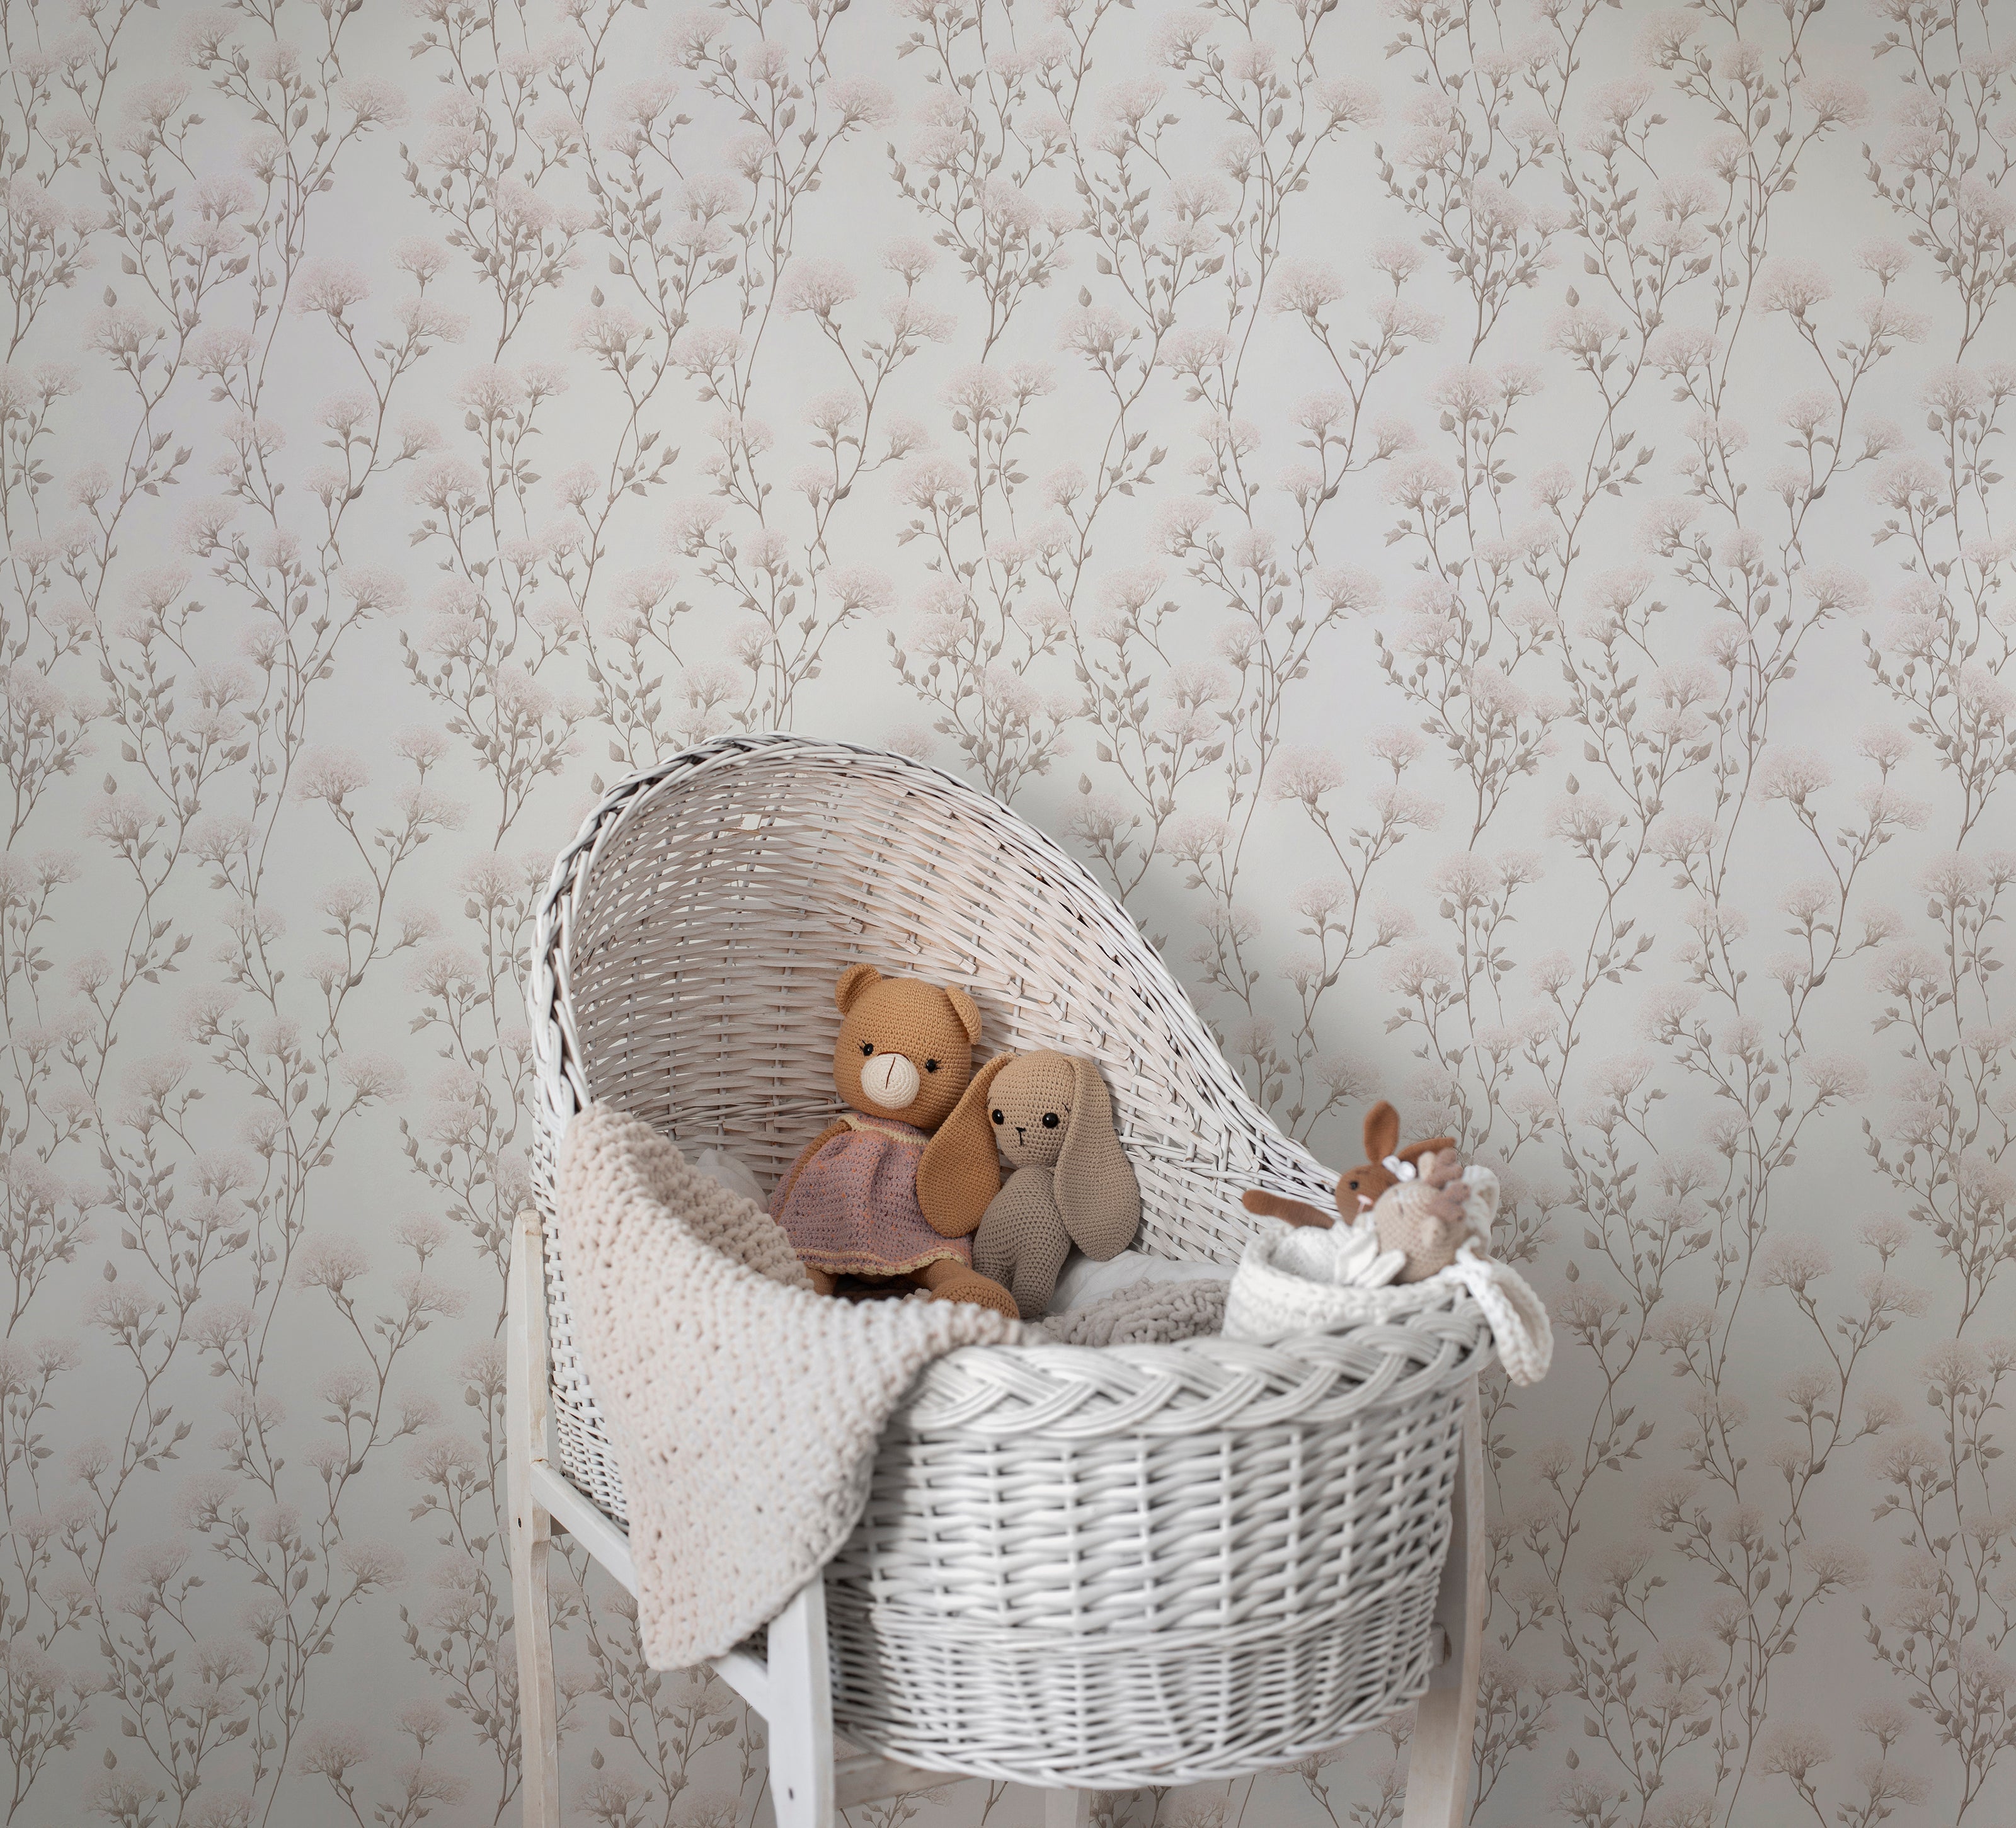 A cozy nursery corner showcasing the Vintage Floral Reverie Wallpaper as a gentle and refined backdrop, with soft pink blooms and gray foliage complementing the white wicker bassinet and plush teddy bears.